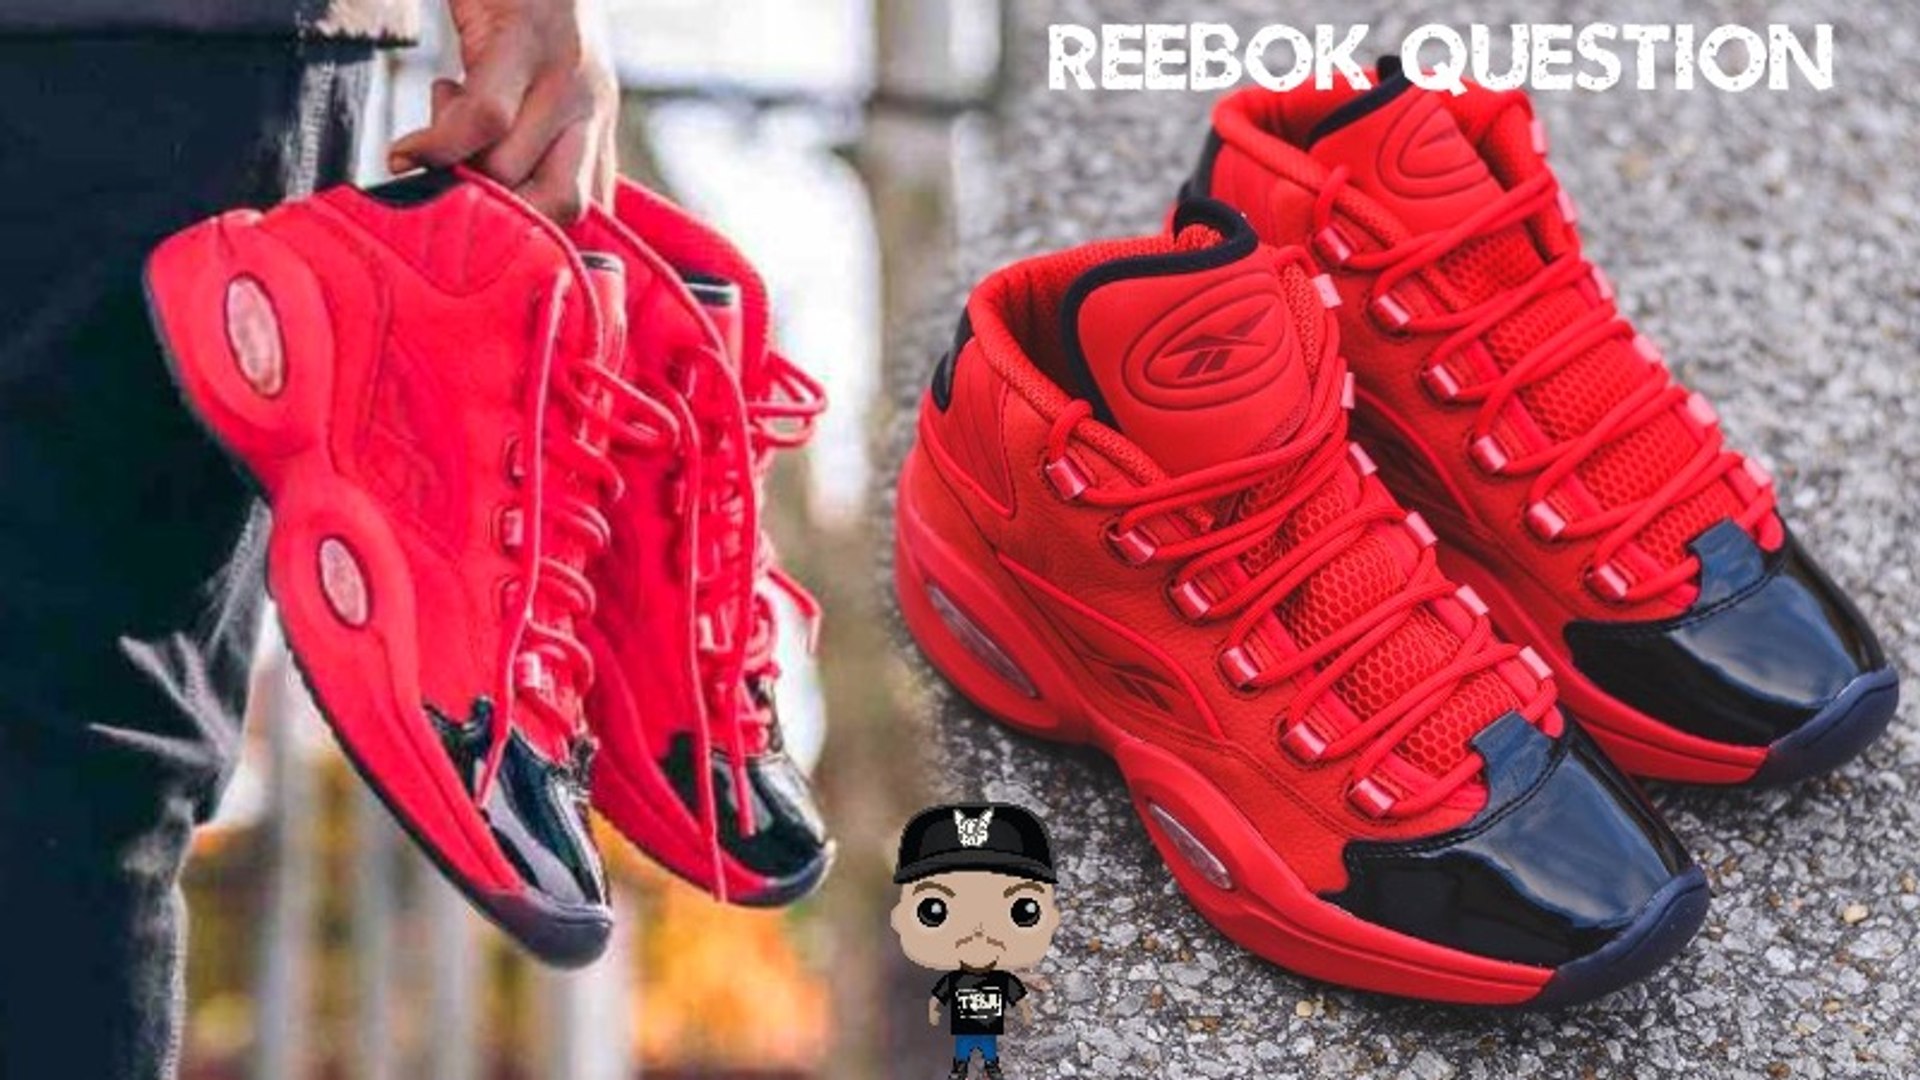 Reebok Question Heart Over Hype Iverson Sneaker Review - video Dailymotion